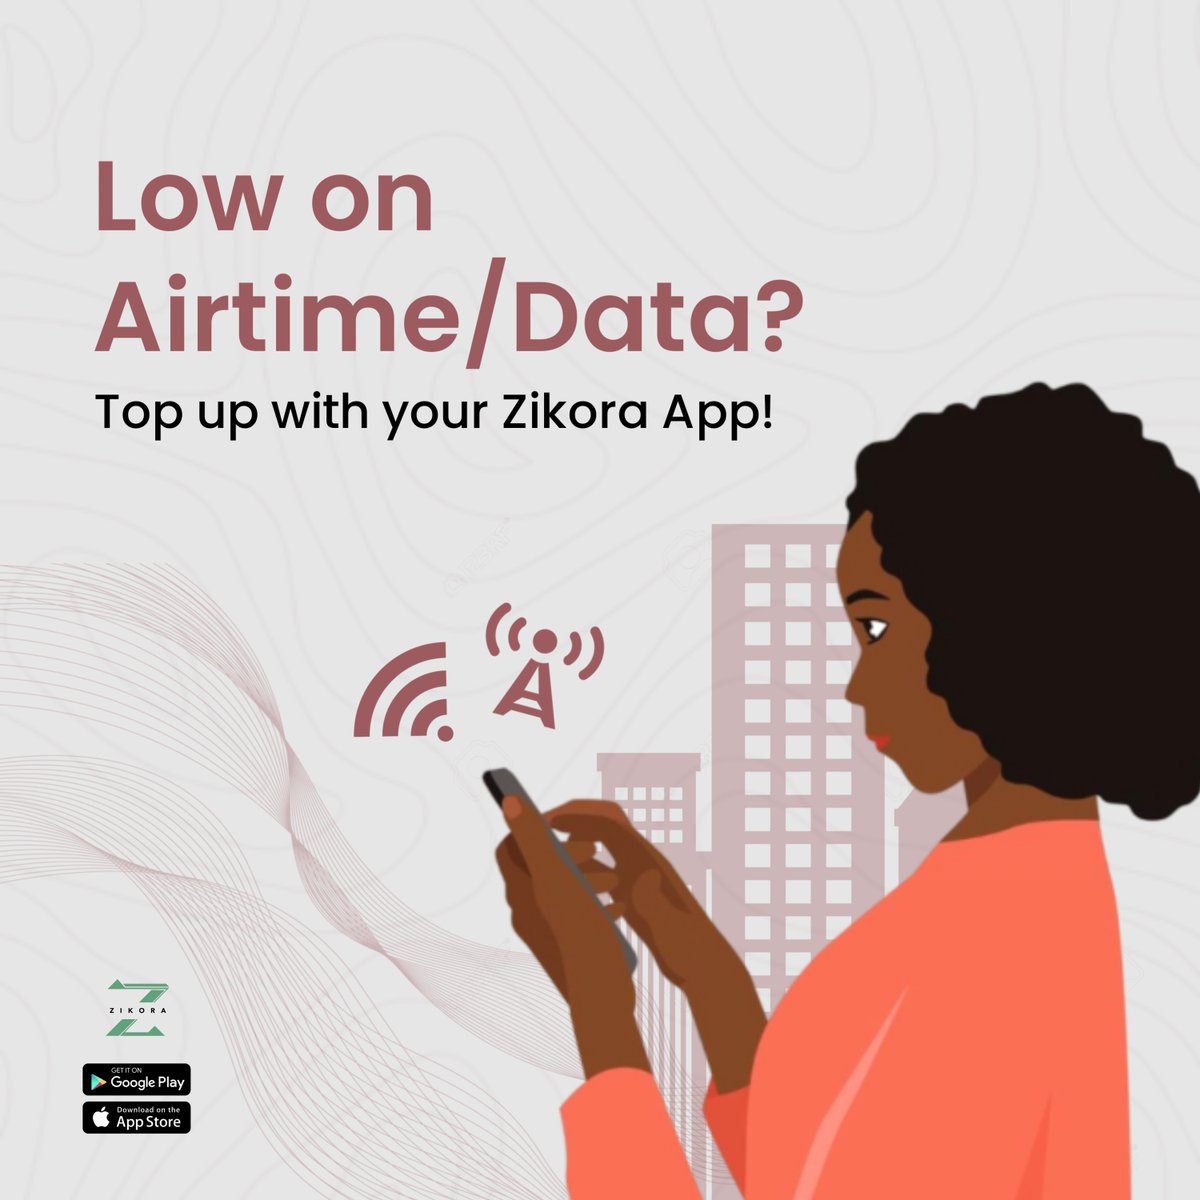 Top up airtime and data for yourself and loved ones with ease on your Zikora App.

Download the Zikora App today!

#ZikoraApp #AirtimeTopUp #DataTopUp #Billspayment